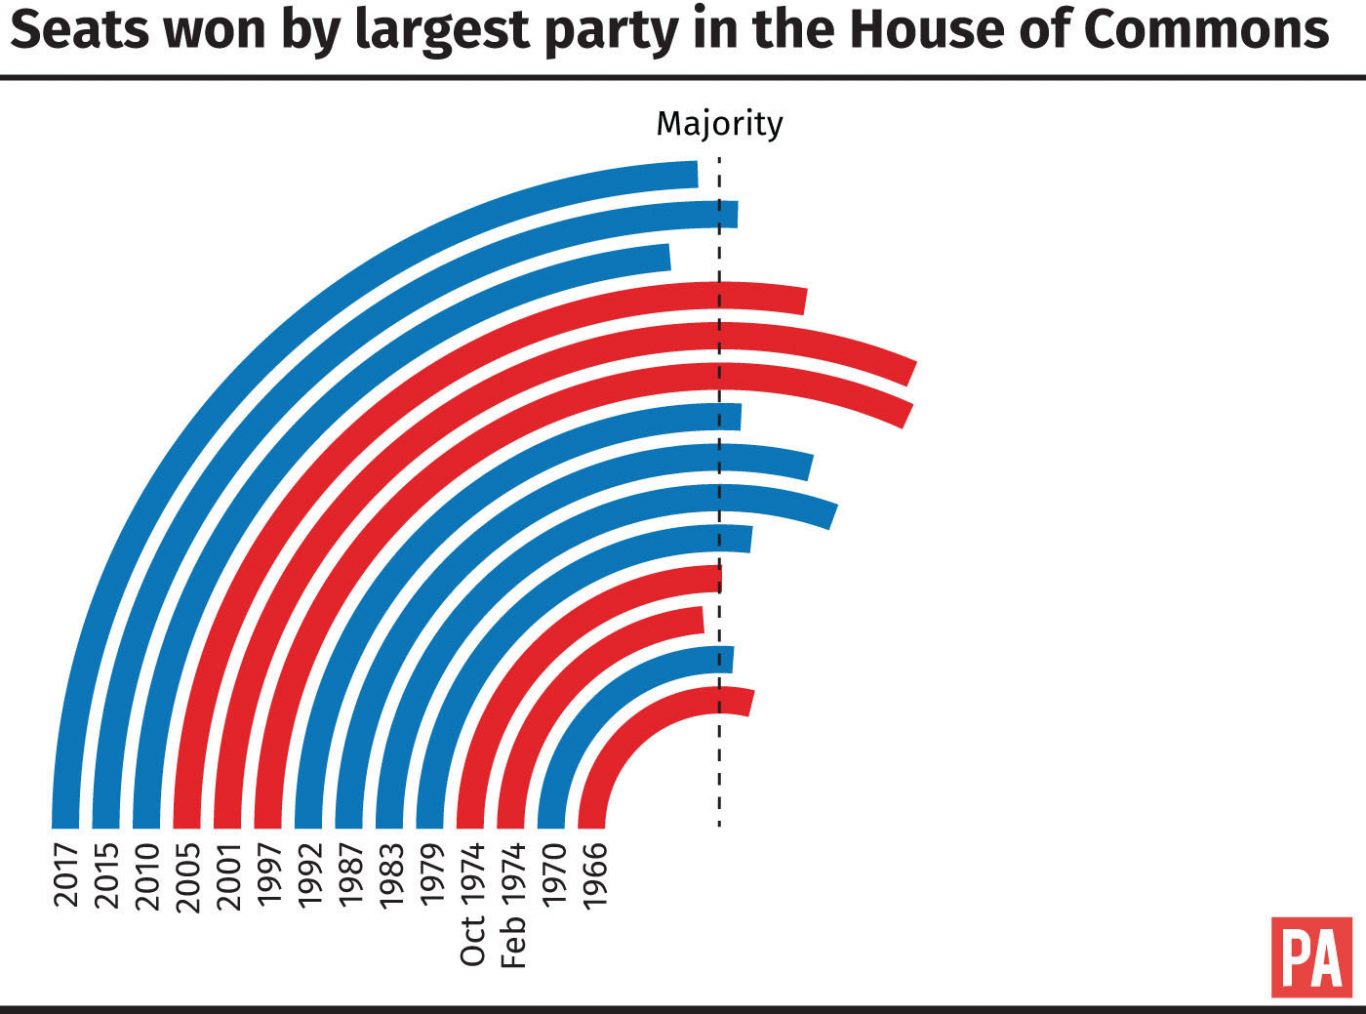 Seats won by the largest party in the House of Commons, how the majorities compare